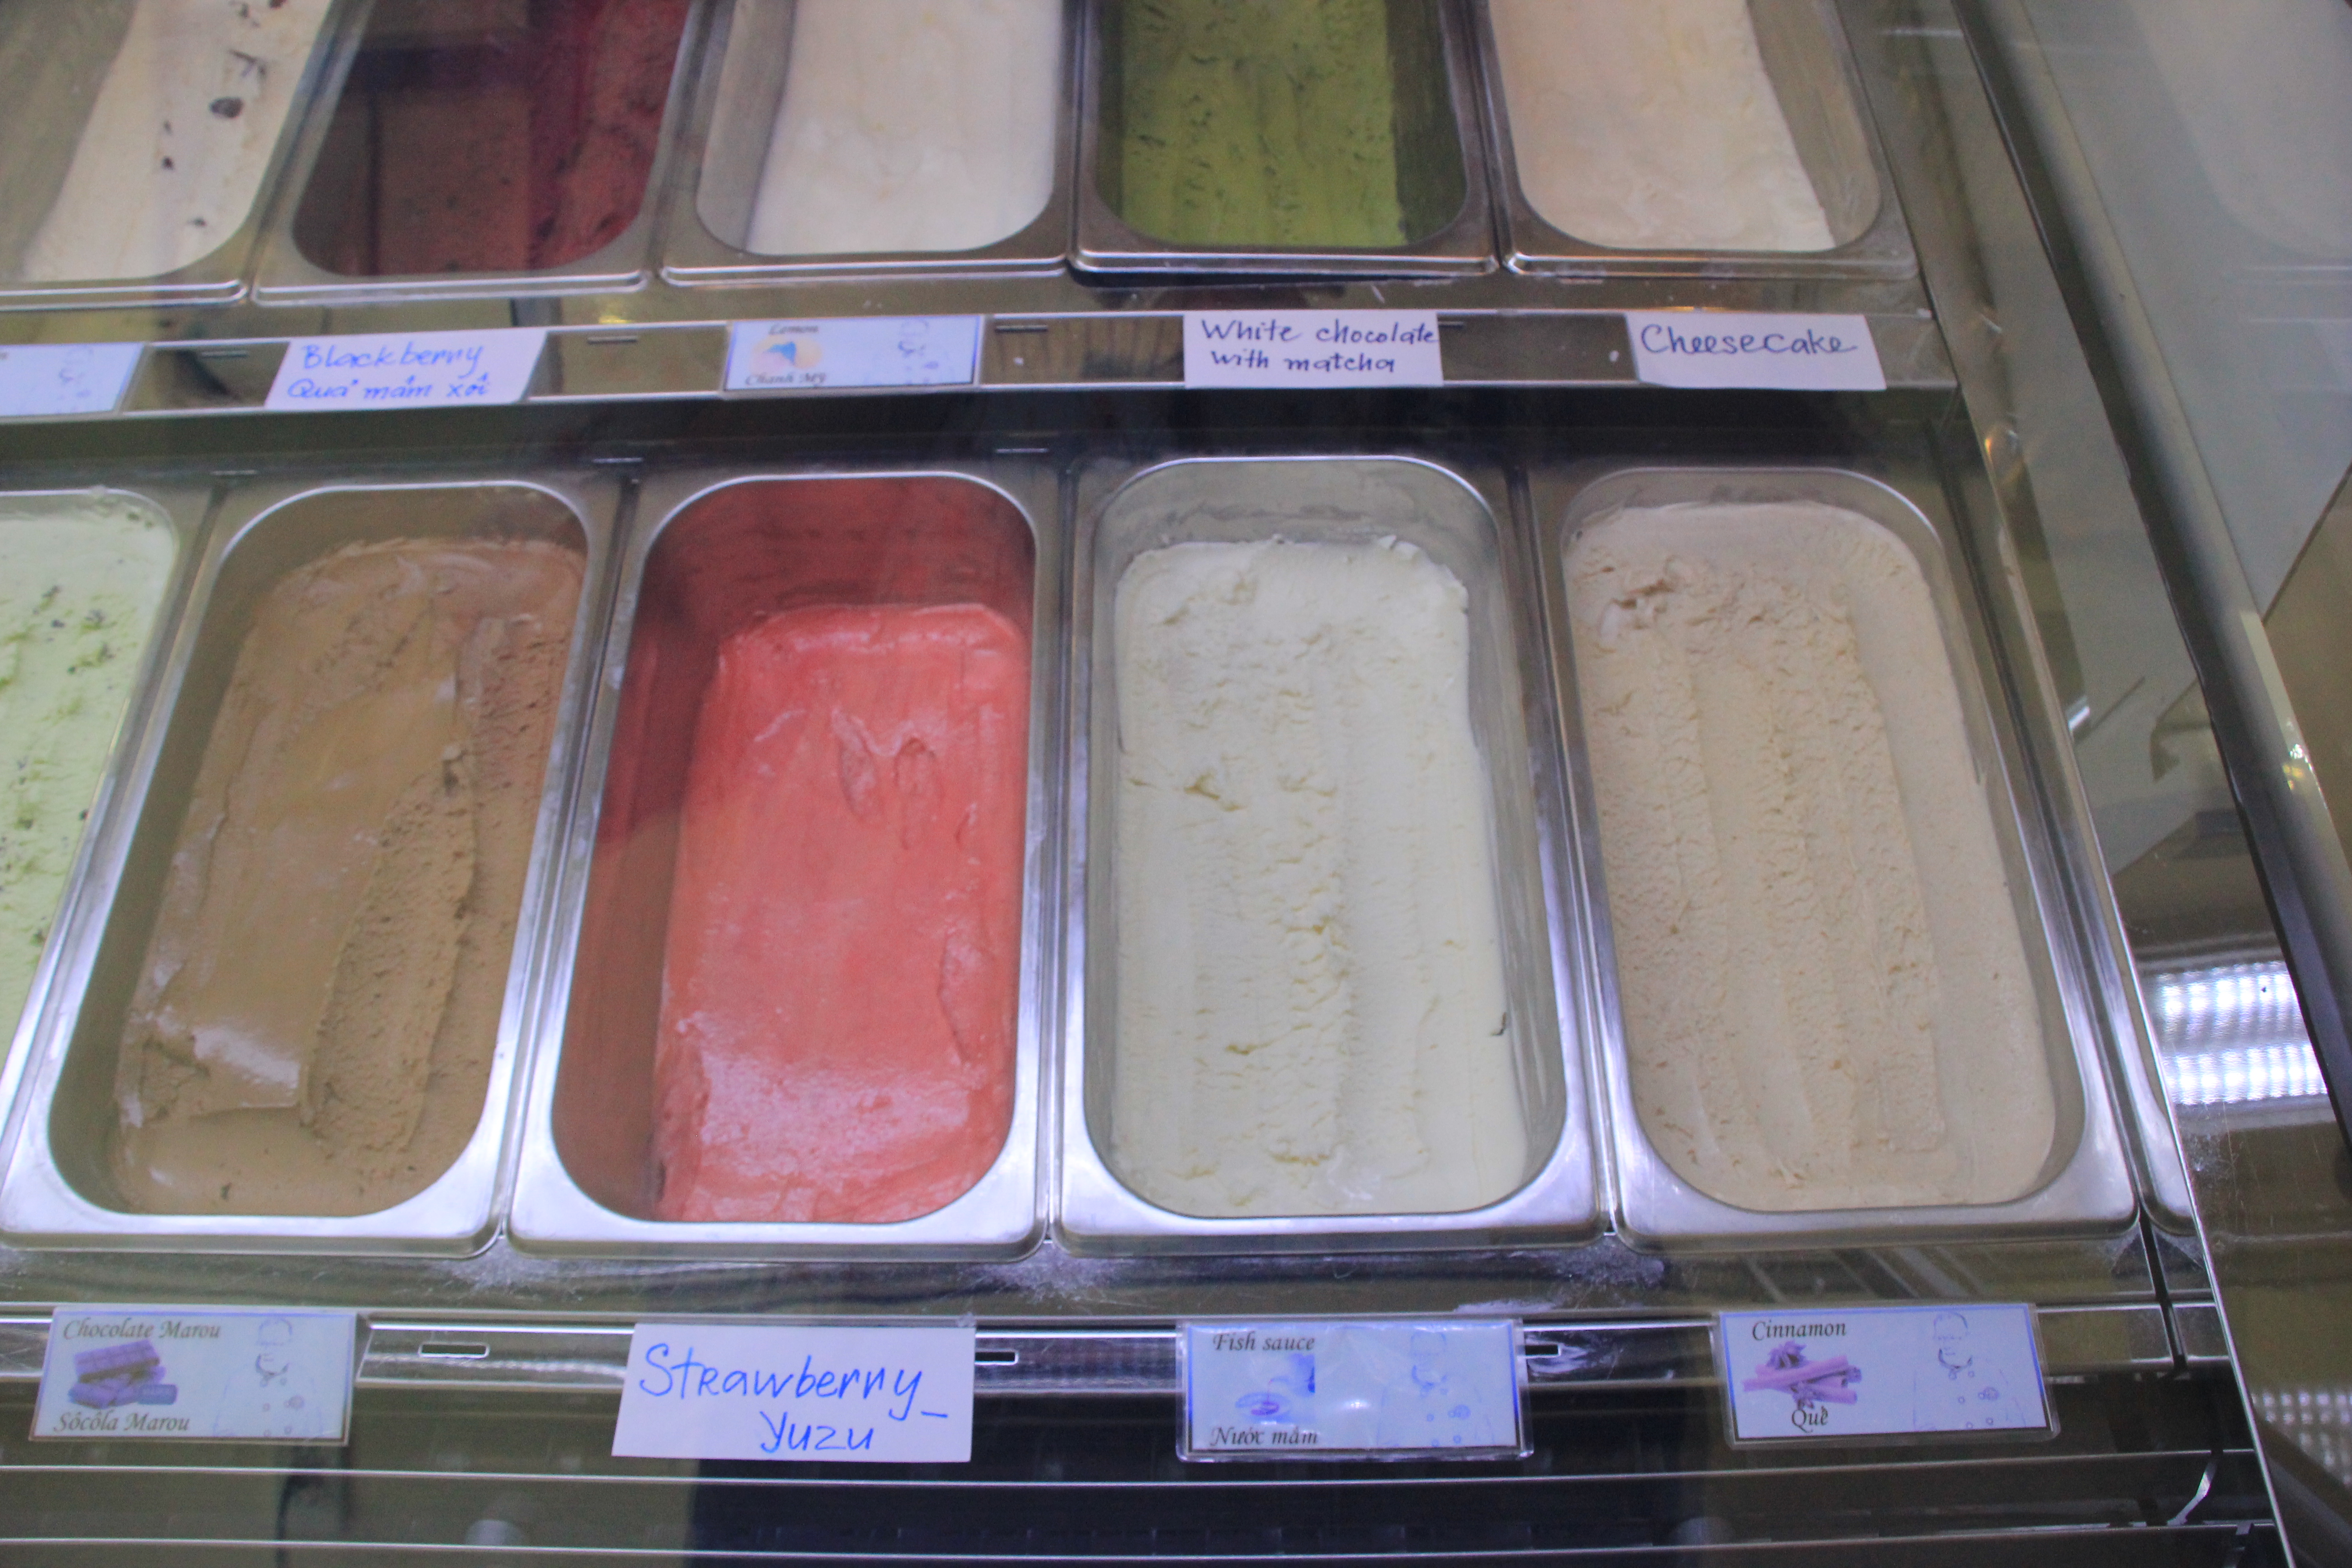 Fish sauce gelato is seen being sold along with other flavors at Ralf’s Arisan Gelato. Photo: Dong Nguyen/Tuoi Tre News